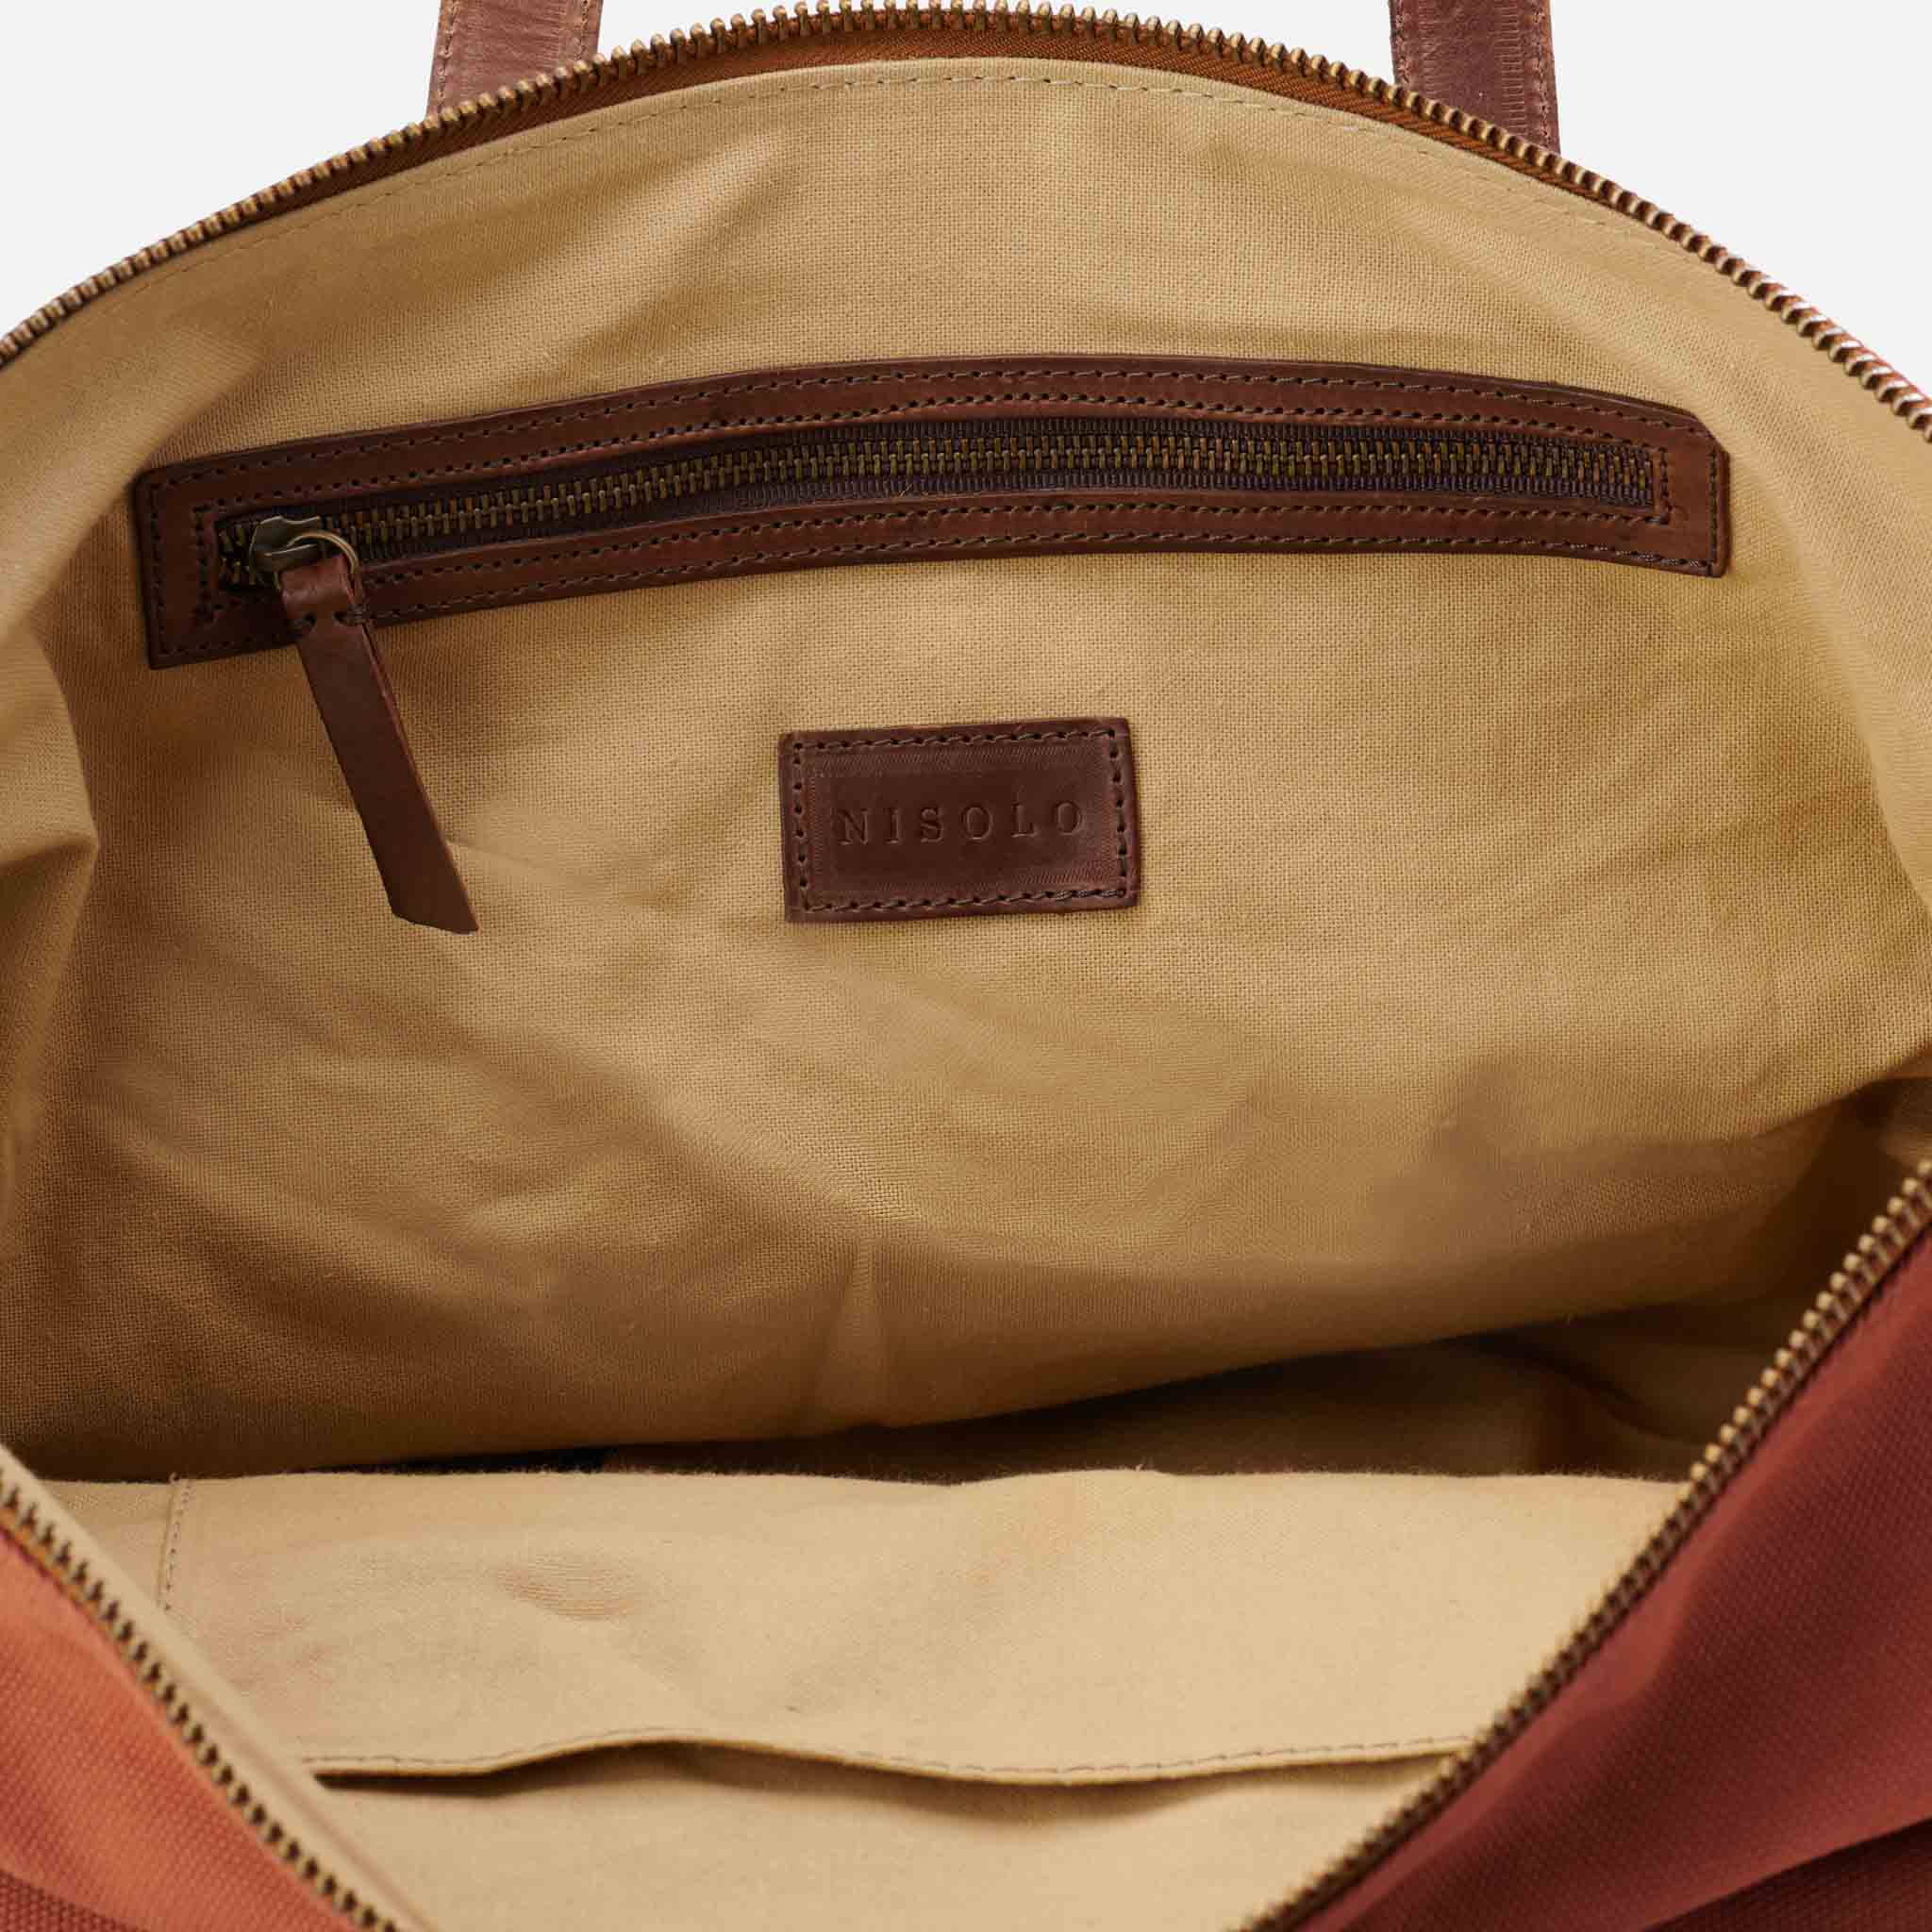 Product Image 2 of the Canvas Weekender Amber